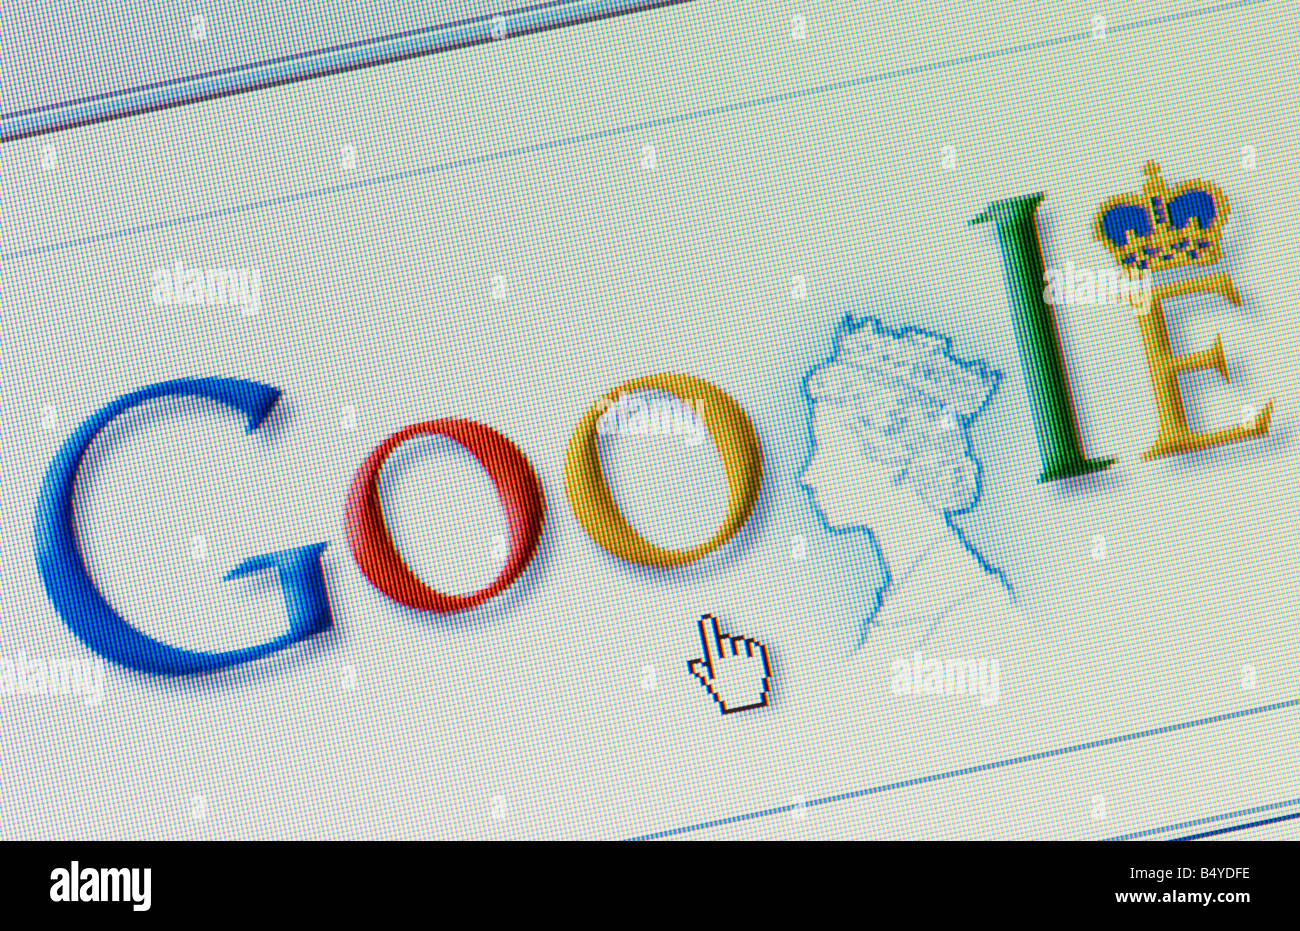 Macro screenshot of Google search engine logo incorporating image of Queen Elizabeth II to mark her visit to the company s UK HQ Stock Photo